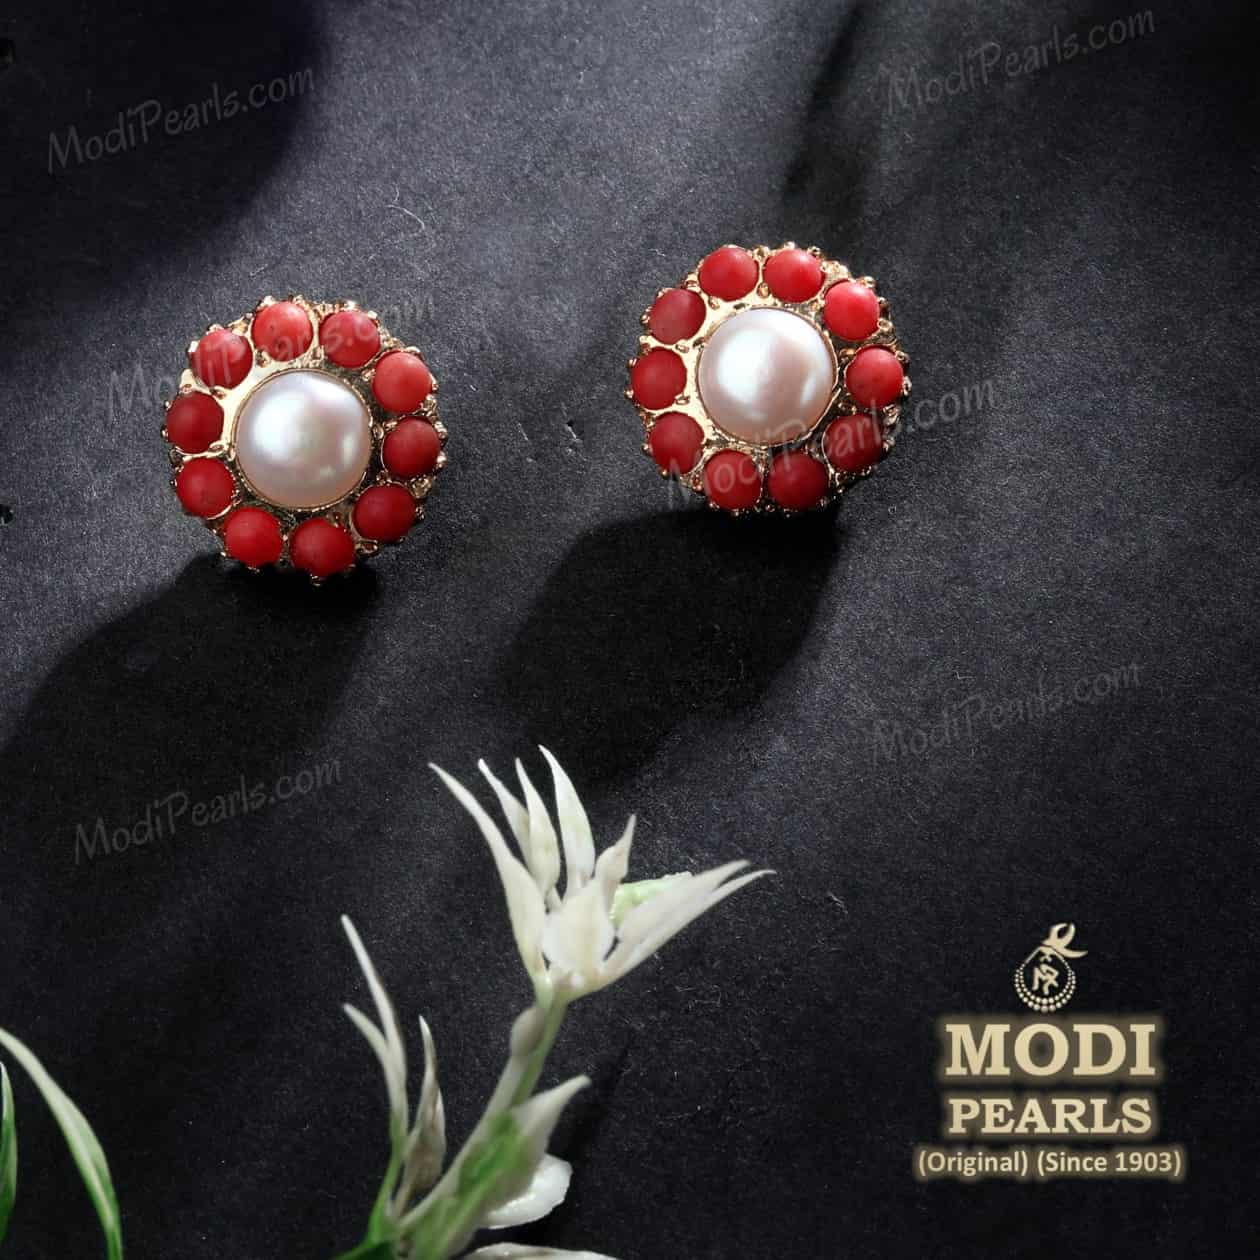 Details more than 121 coral pearl earrings super hot